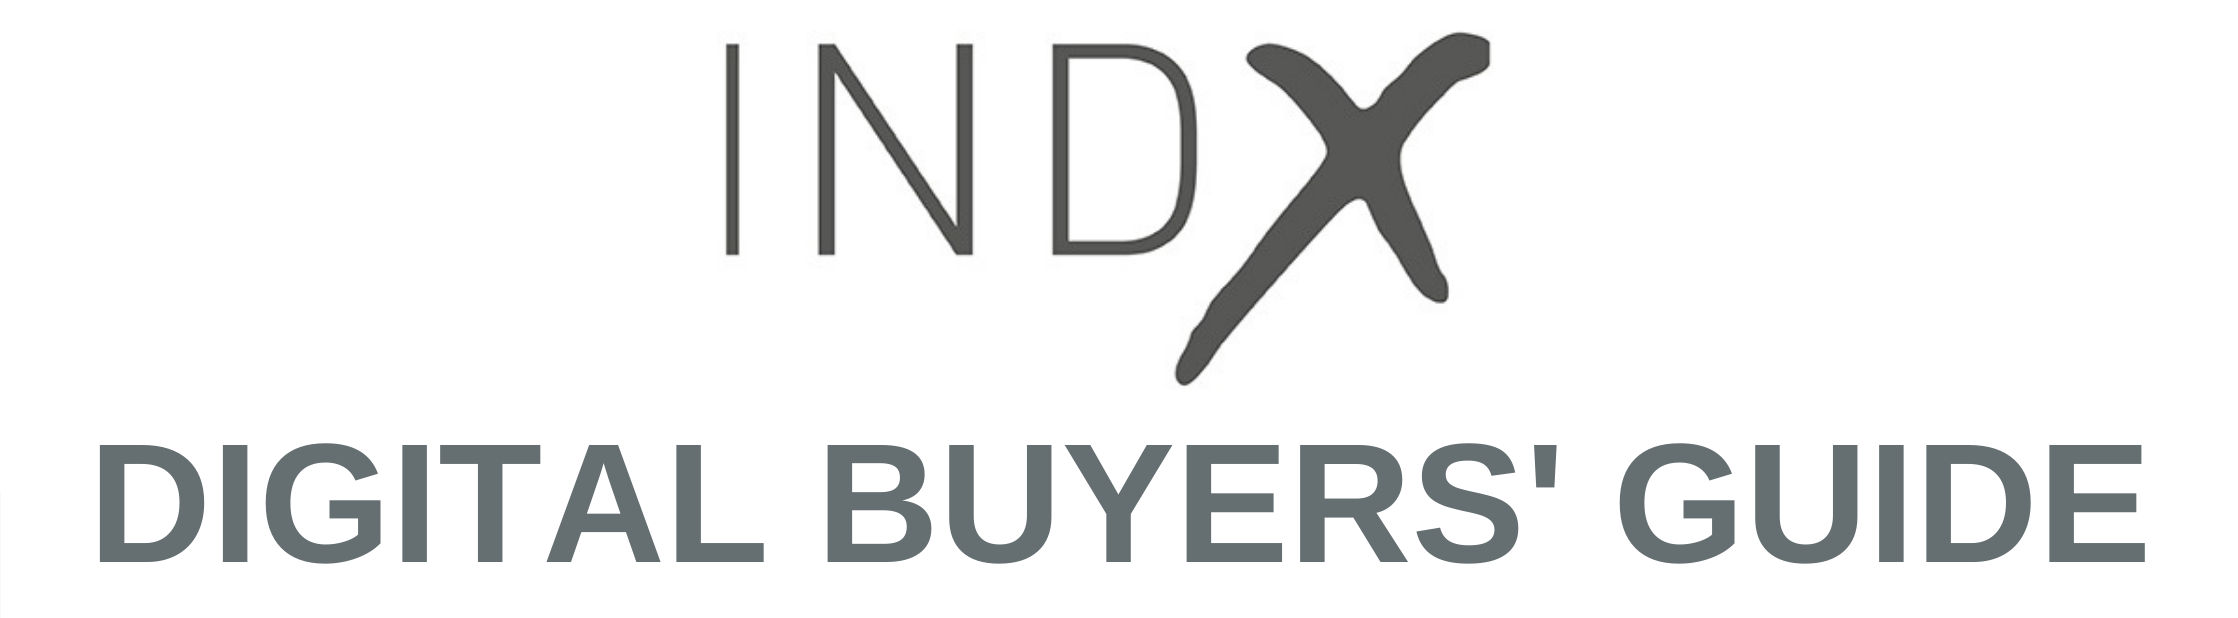 INDX Digital Buyers Guide